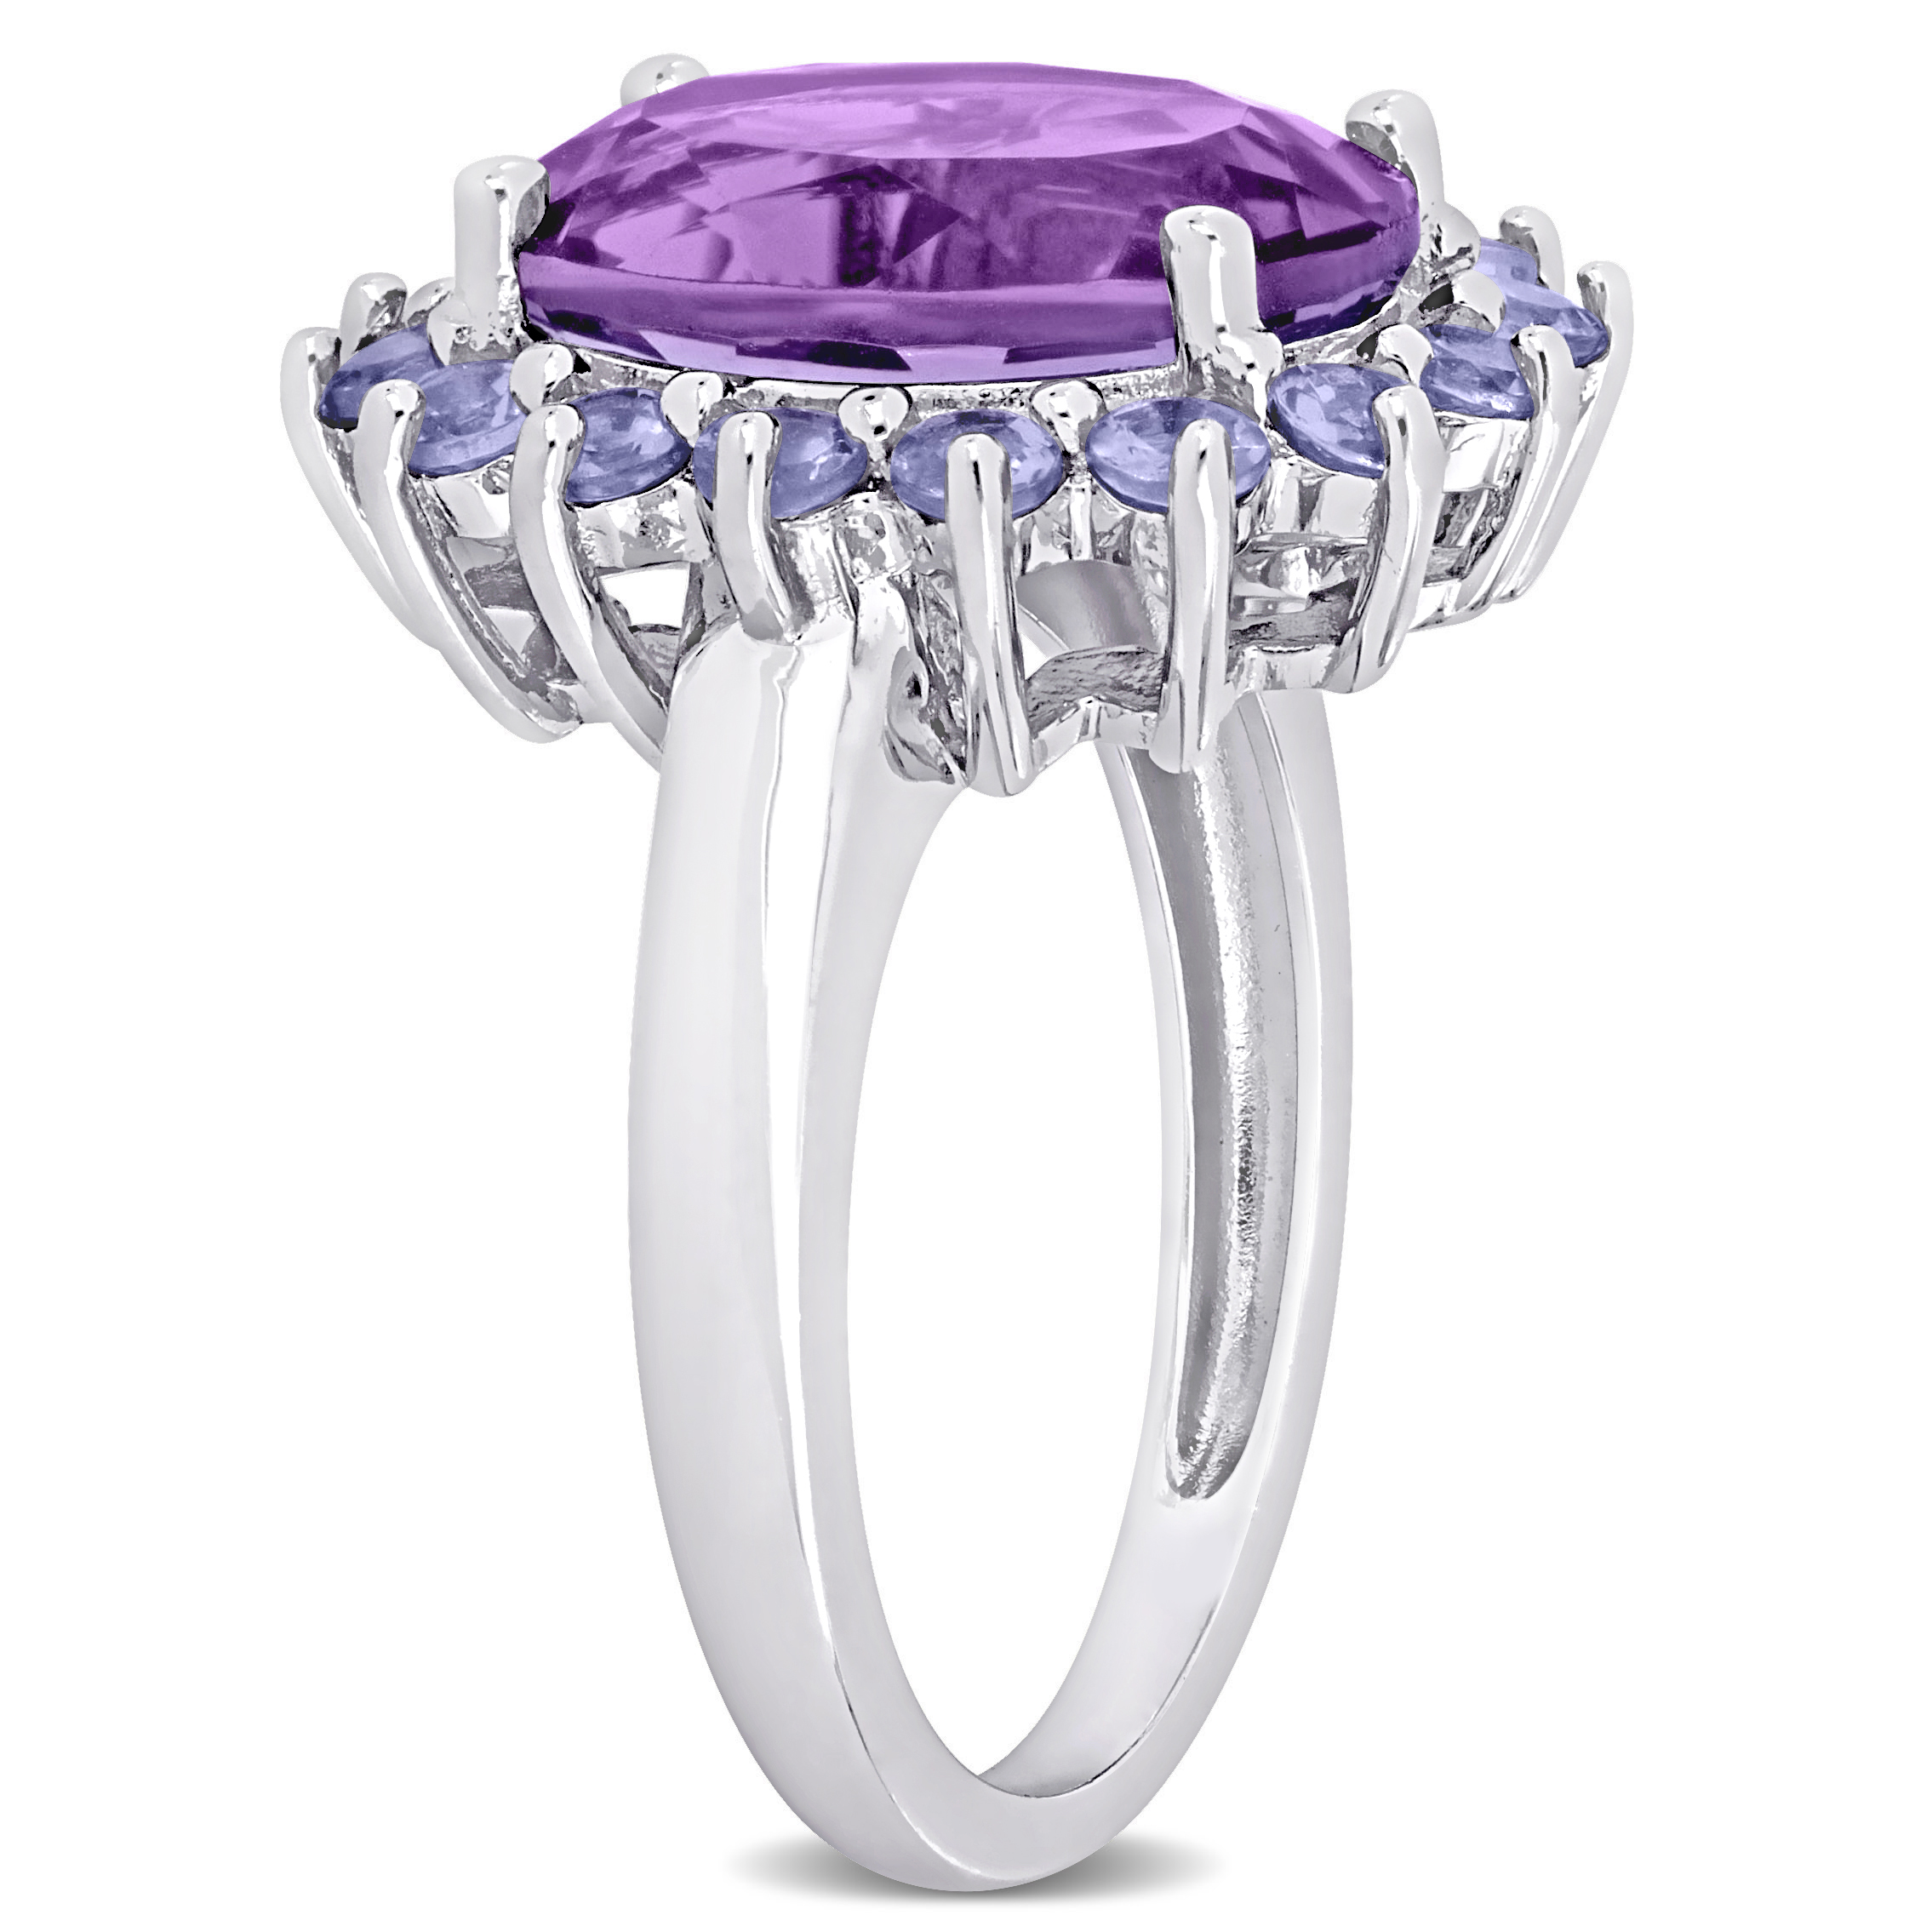 5 7/8 CT TGW Oval Amethyst and Tanzanite Halo Cocktail Ring in Sterling Silver